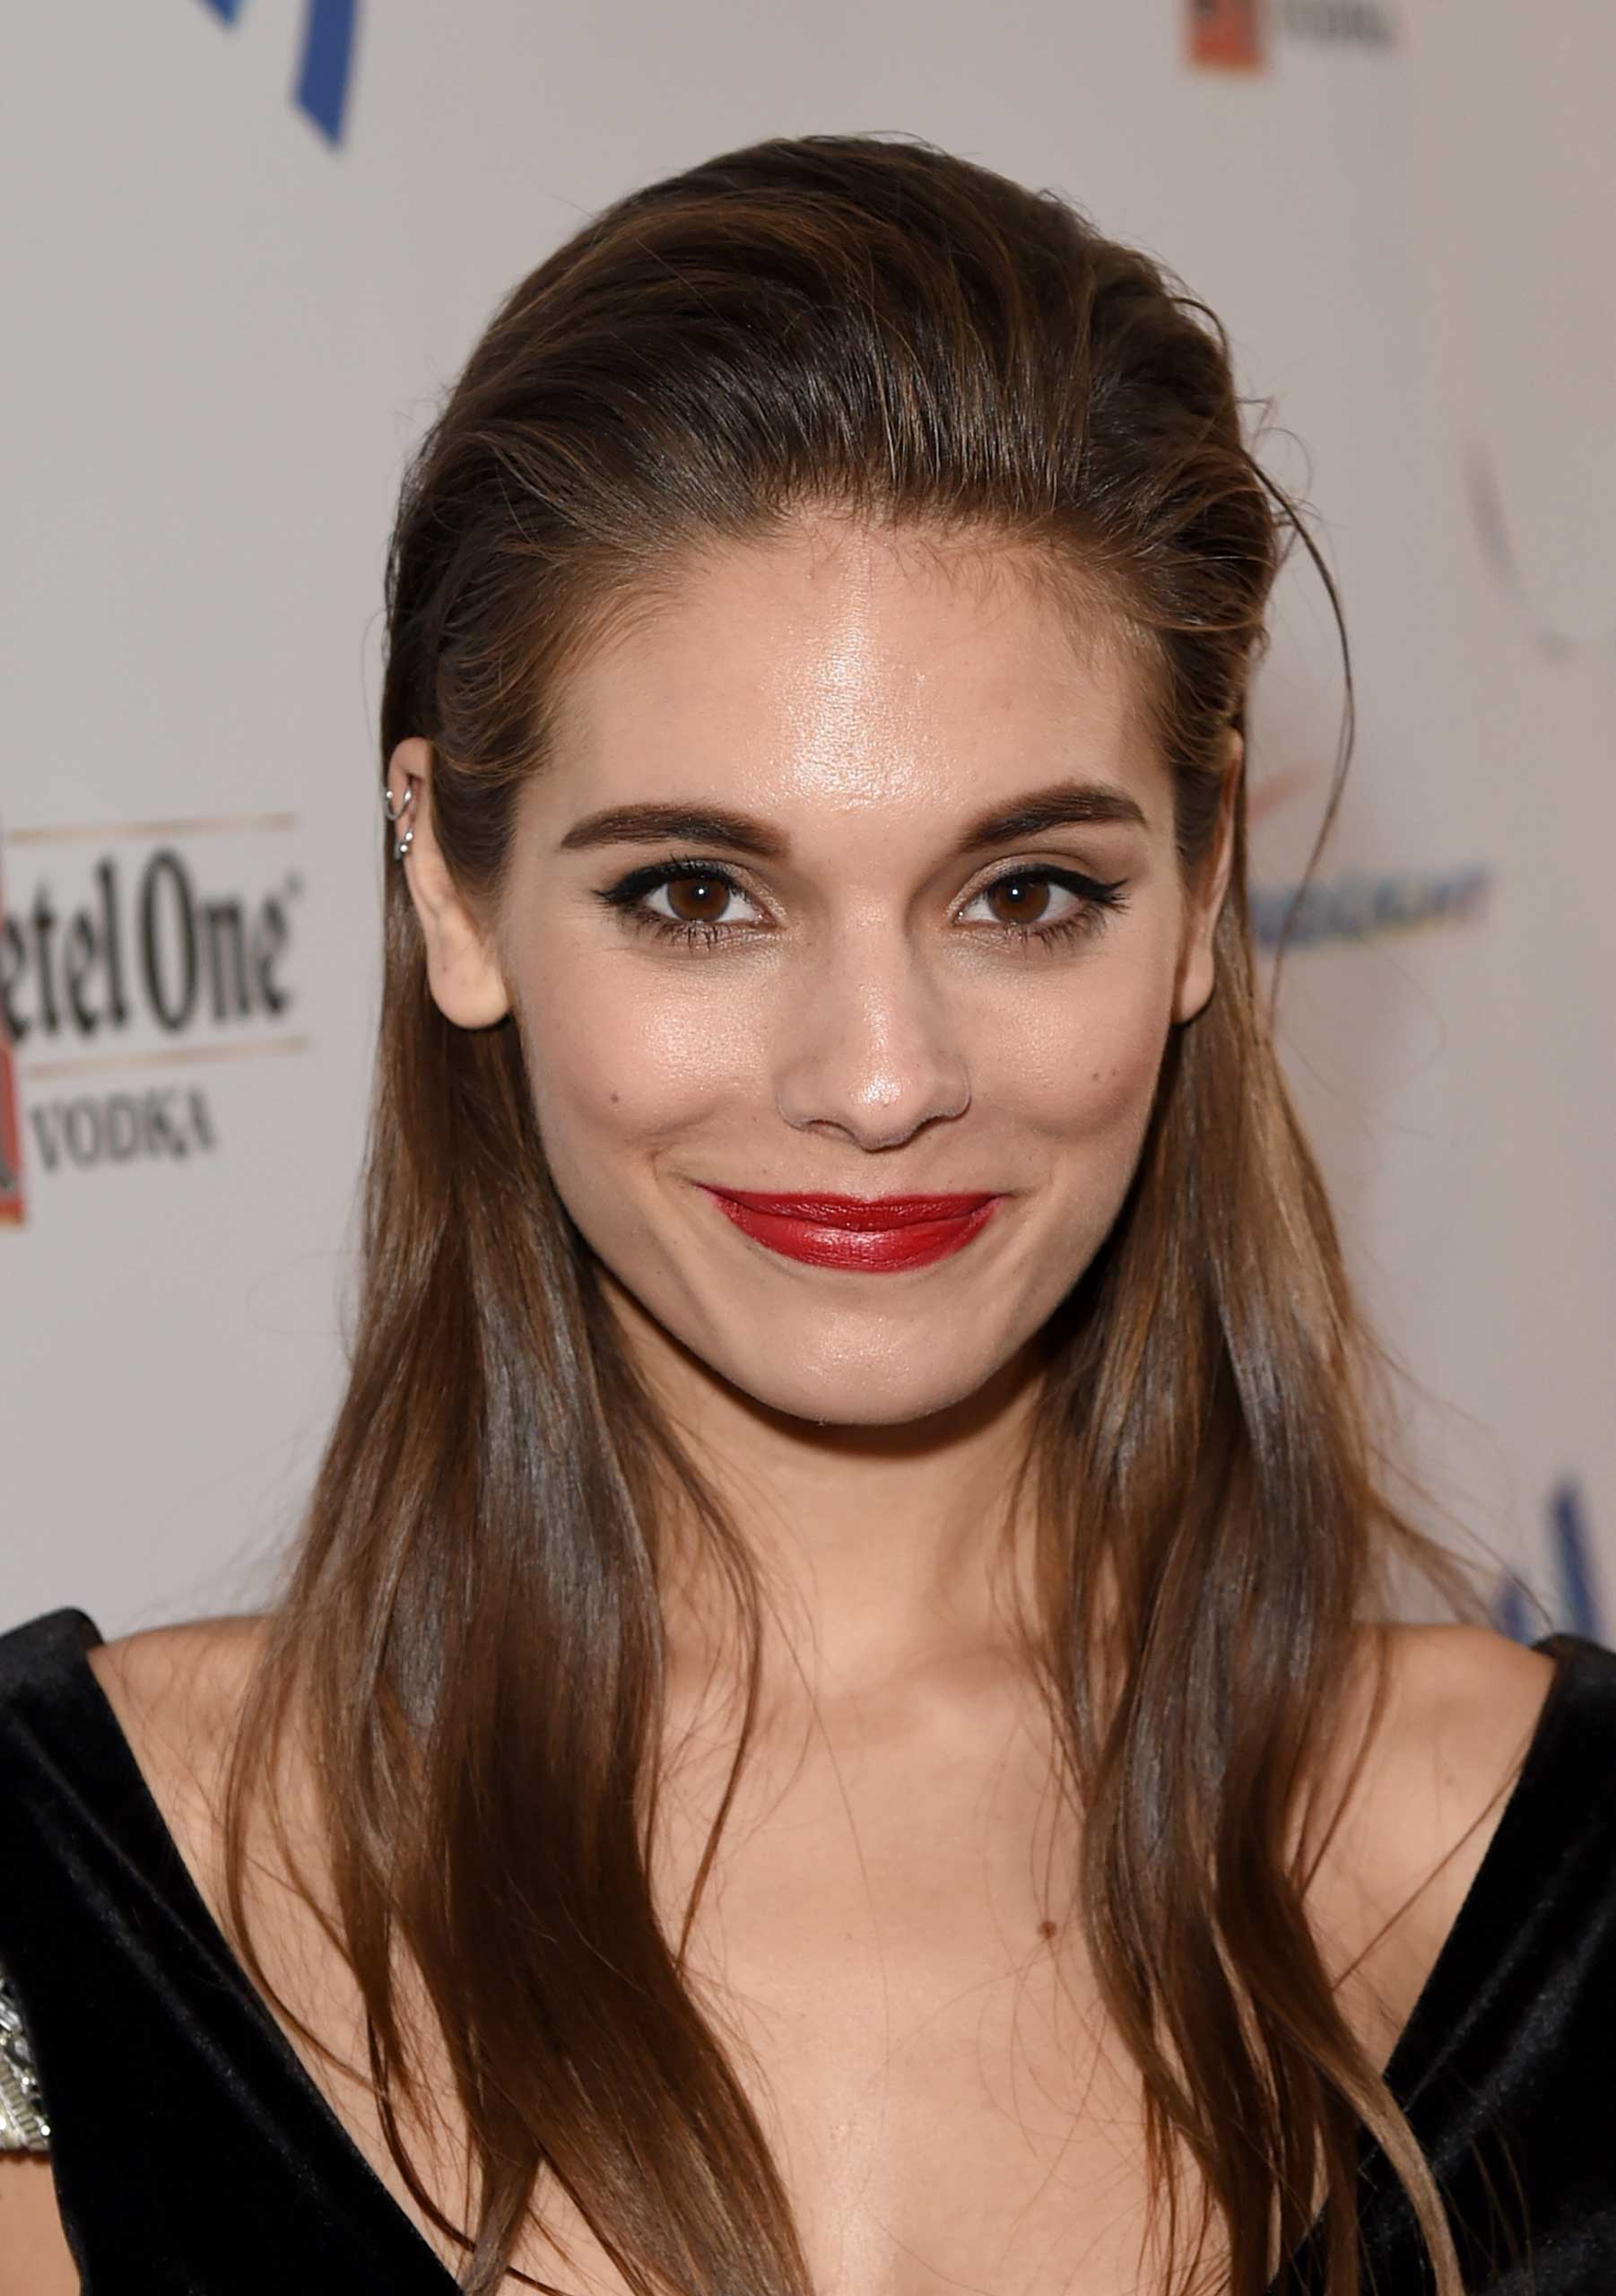 Actress Caitlin Stasey attends the 25th Annual GLAAD Media Awards at The Beverly Hilton Hotel in Los Angeles on April 12, 2014.